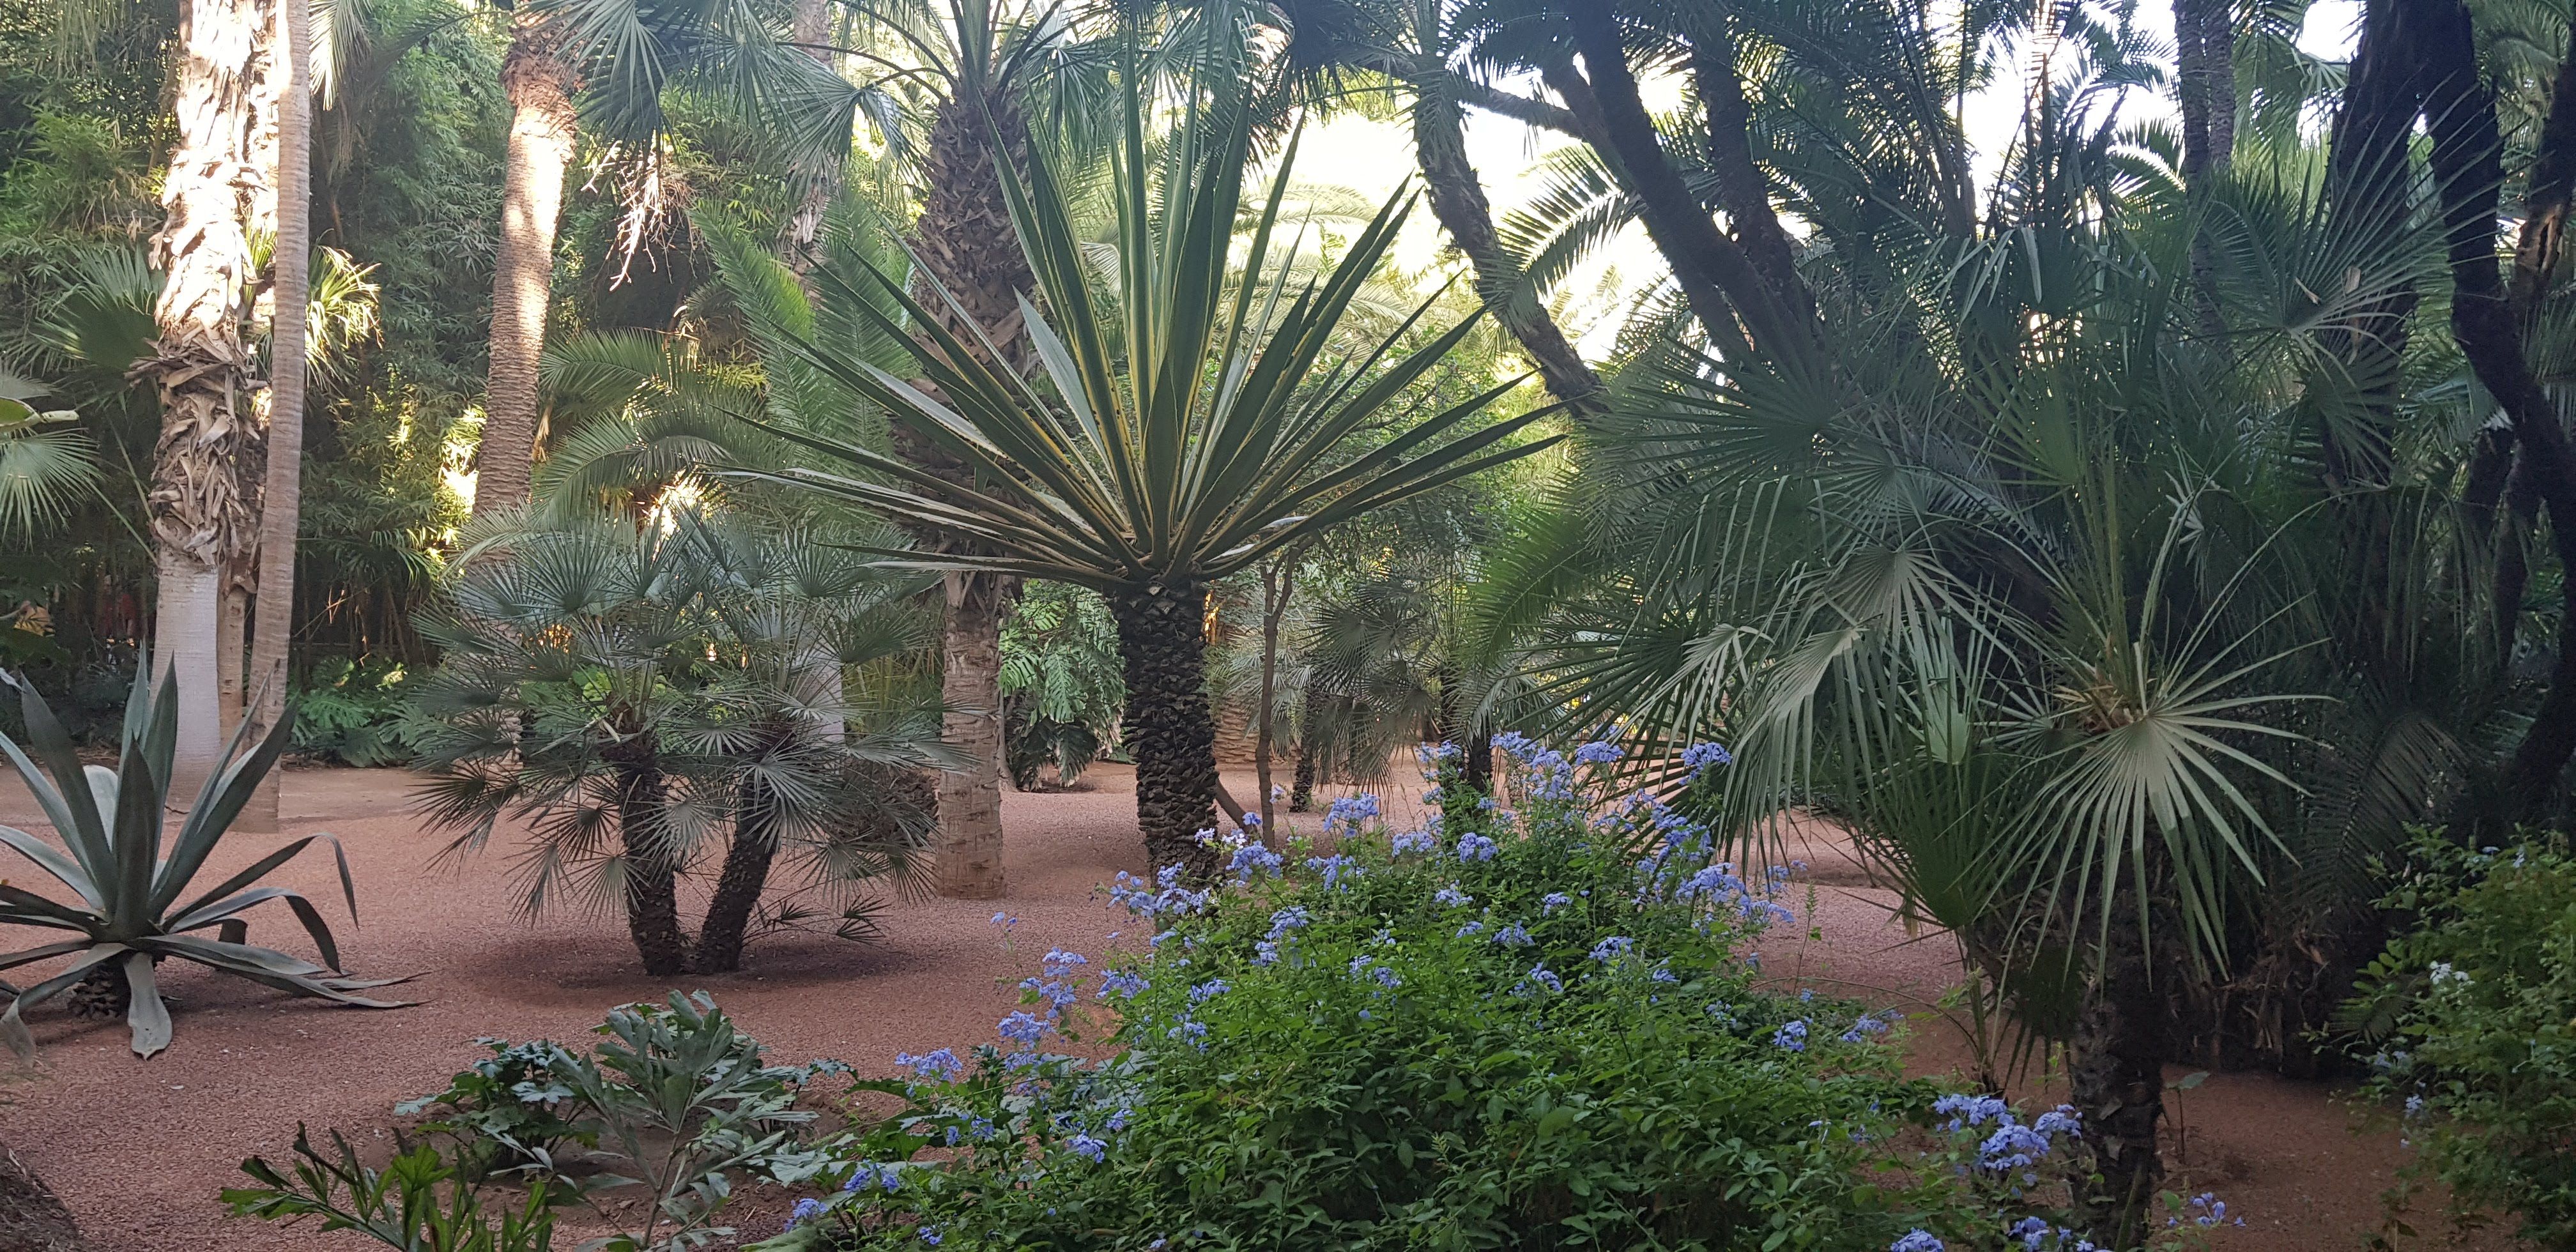 Caption: A photo of different types of palm trees and flowers at the Majorelle Garden, Morocco.